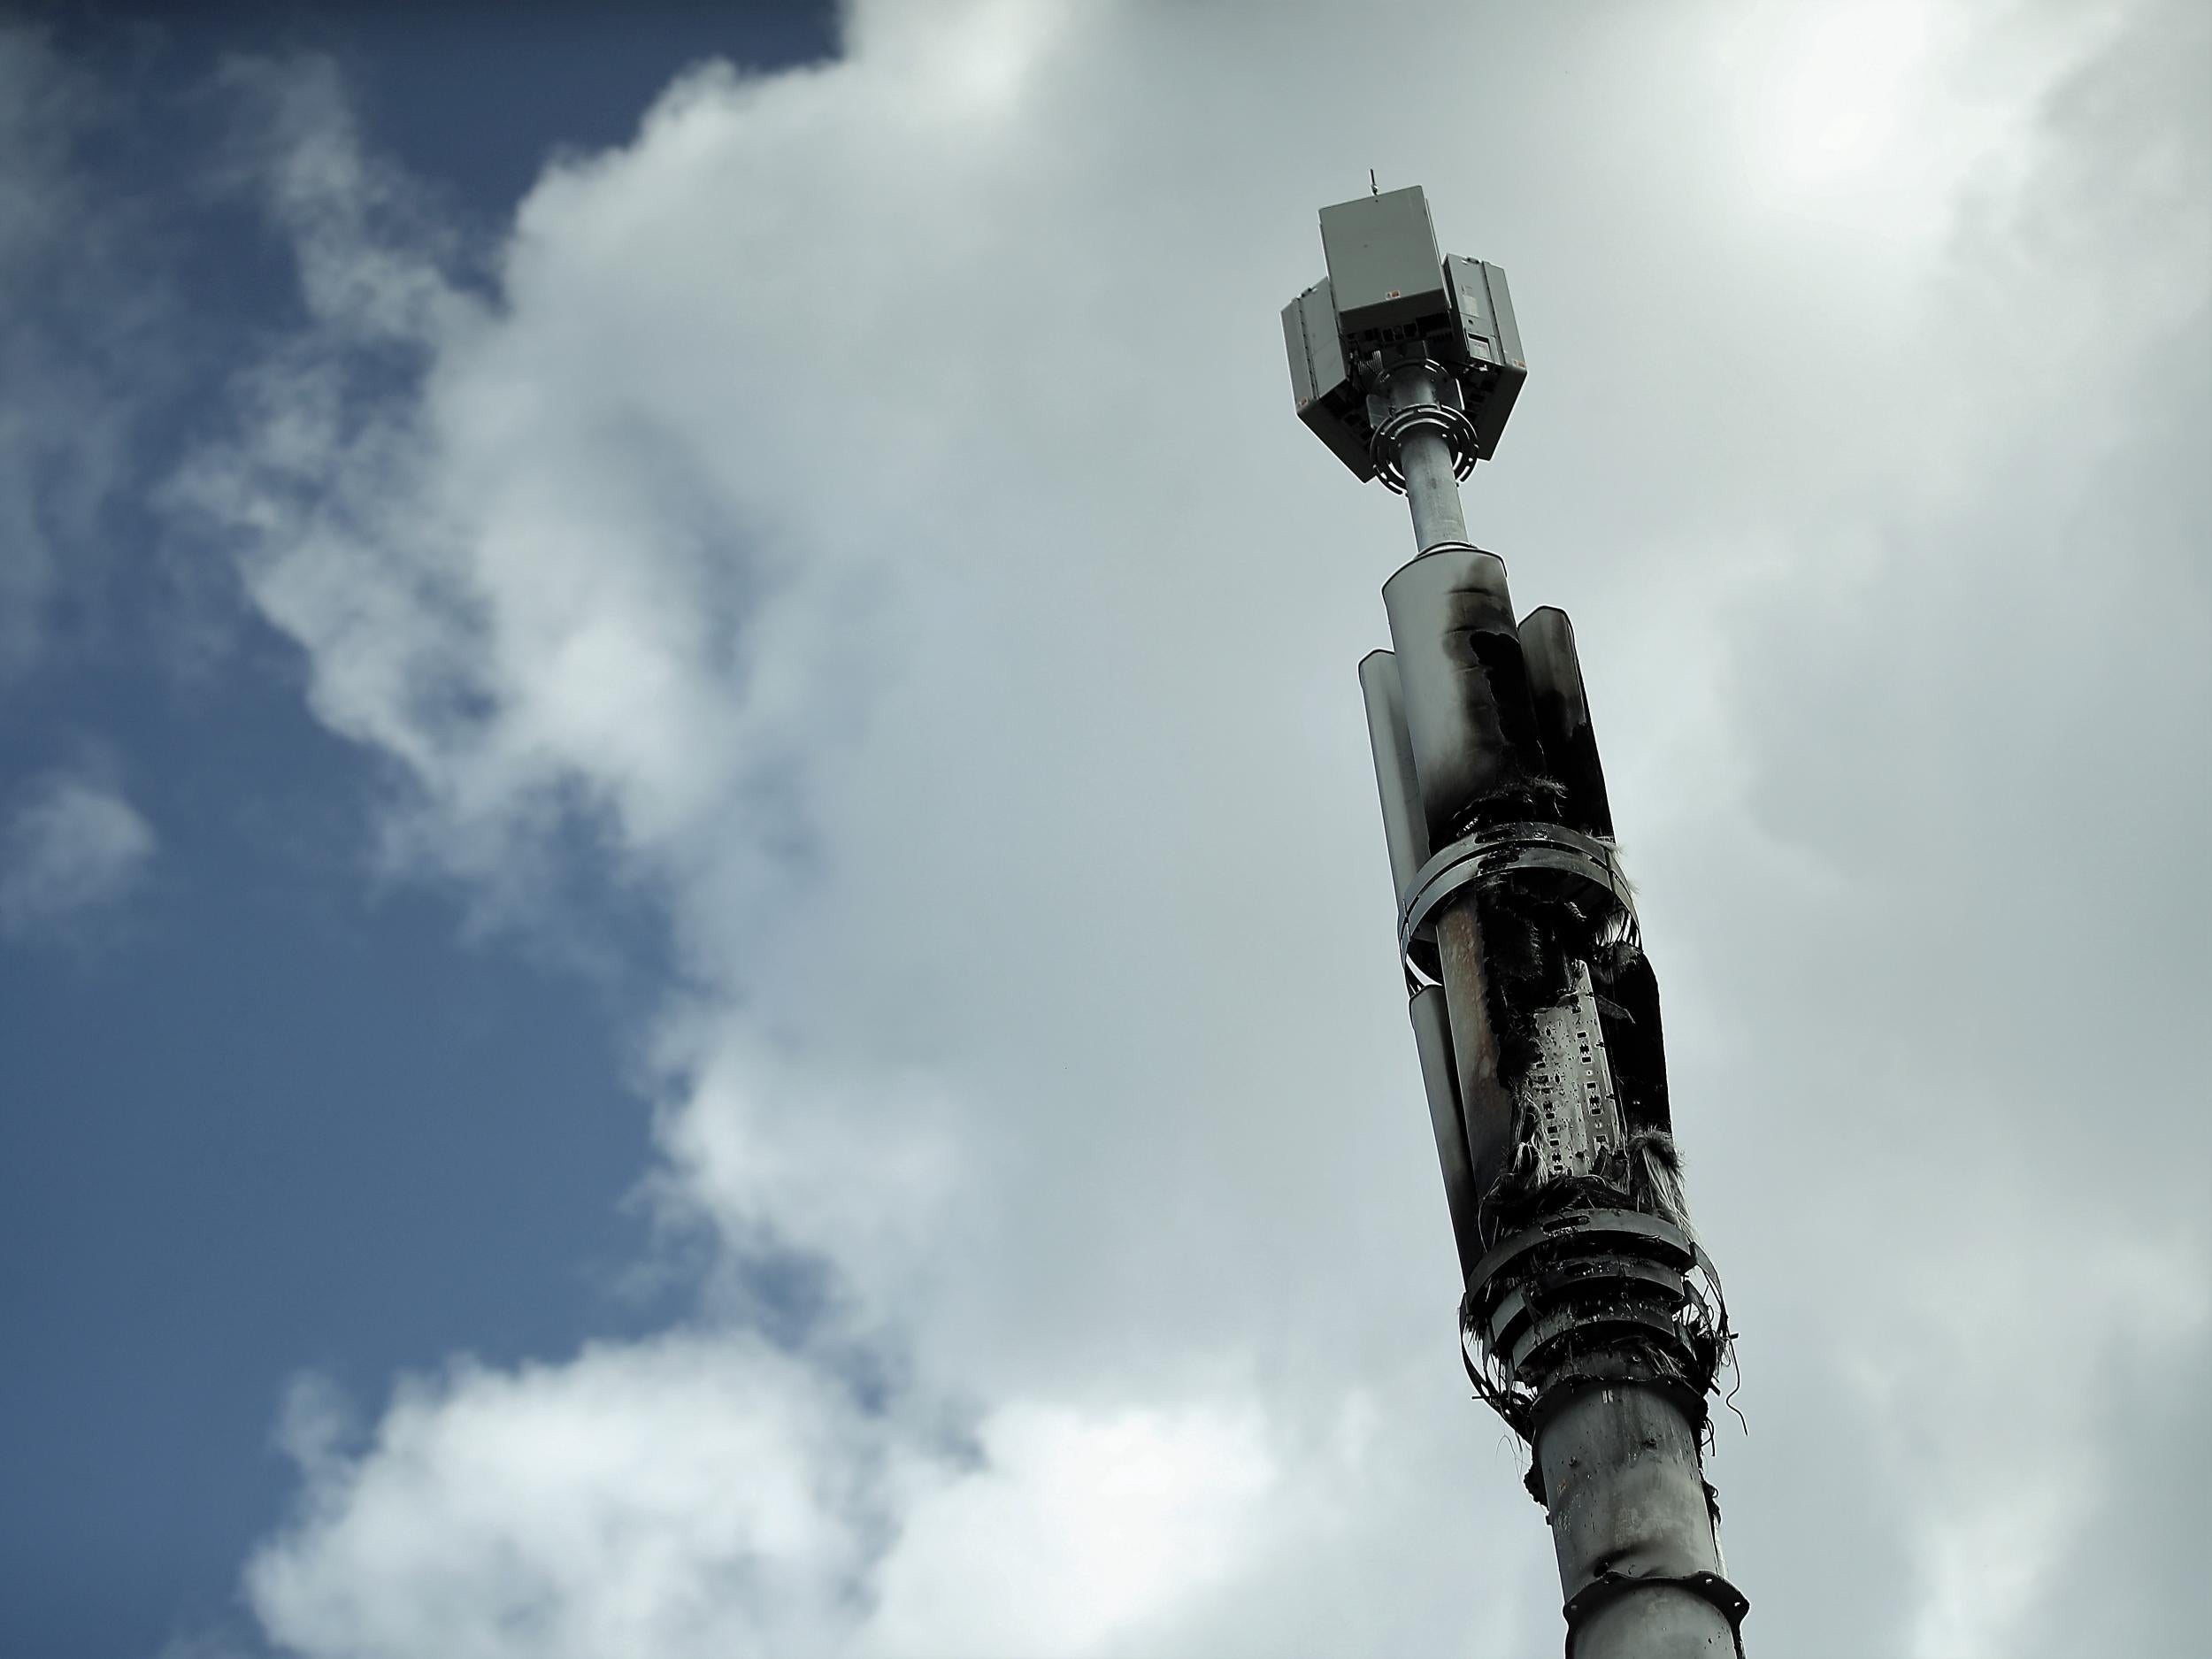 A telecommunications mast damaged by fire is seen in Birmingham amid conspiracy theories linking the coronavirus disease and 5G masts, 6 April, 2020